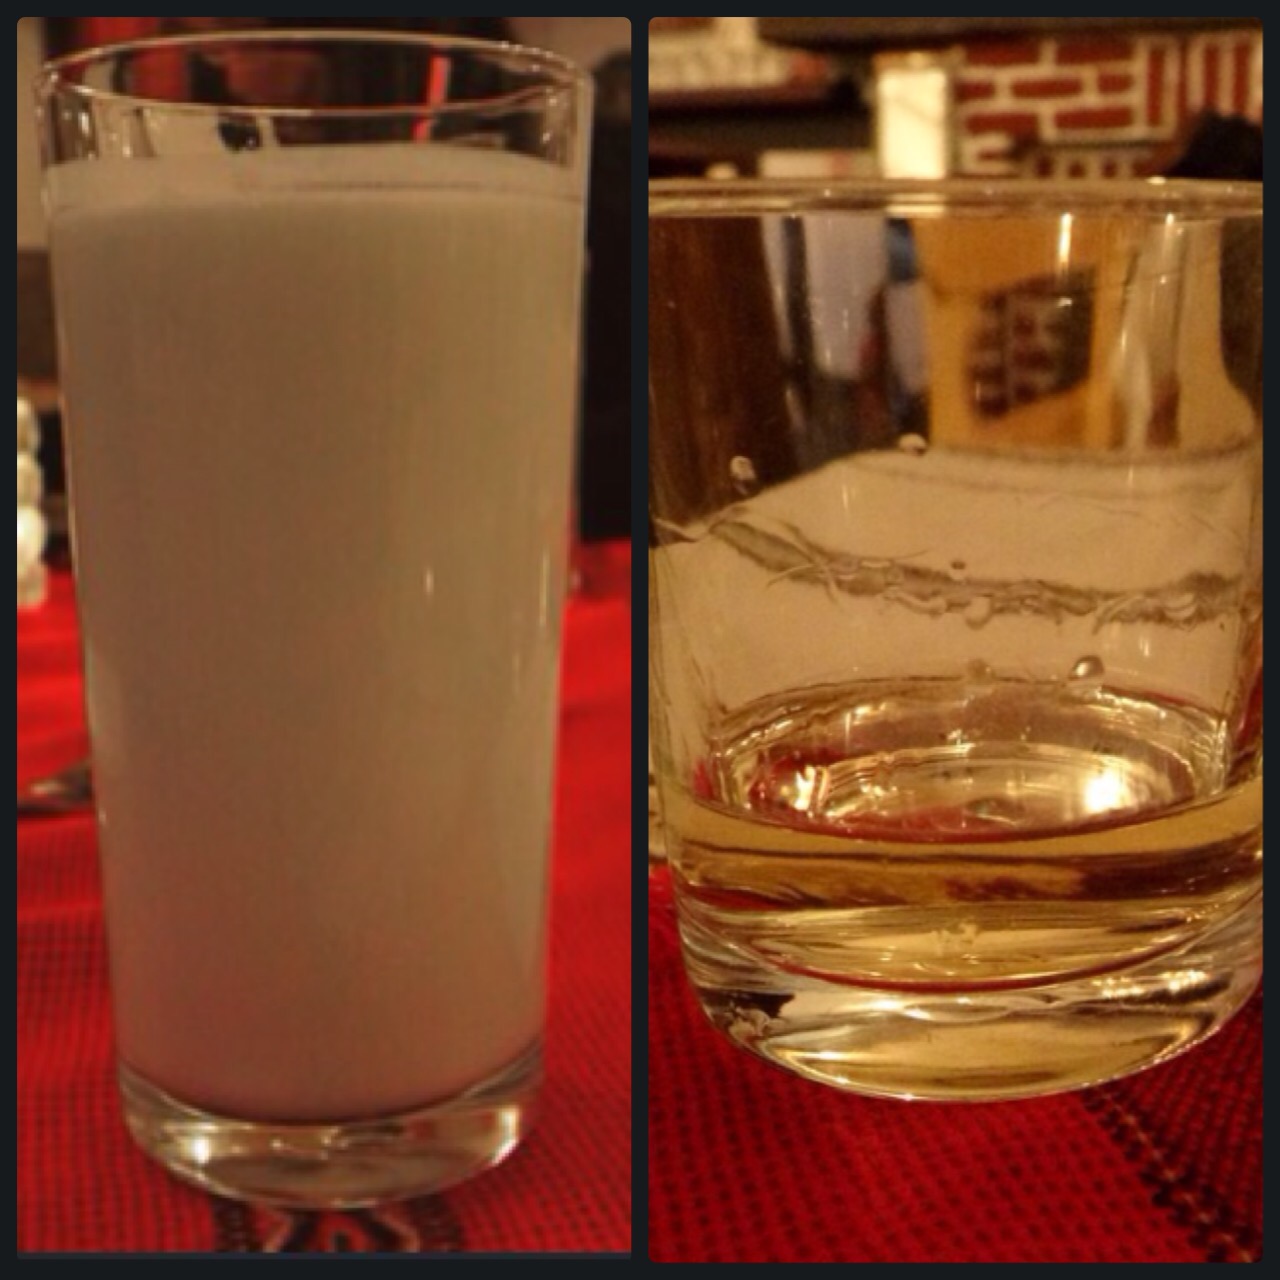 Left: Ayran is a cold beverage made from yogurt and a pinch of salt. Right: Rakia is a typical Balkan alcohol made from fruits like plums, apricots, grapes, peaches, and other Credit: Elitsa Grigorova